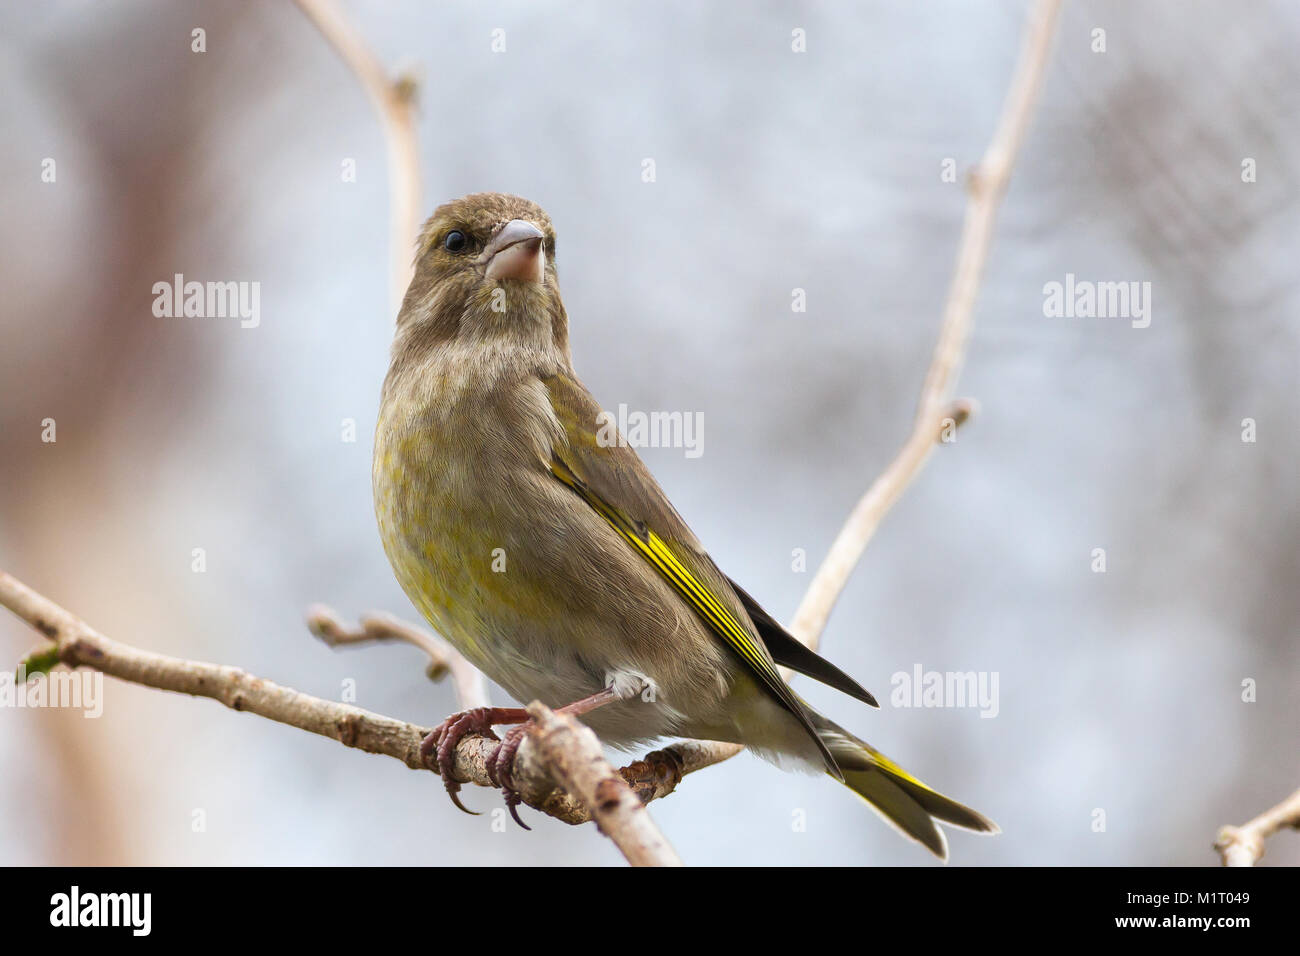 Adult male Greenfinch, Carduelis chloris, perched in tree branch, UK Stock Photo